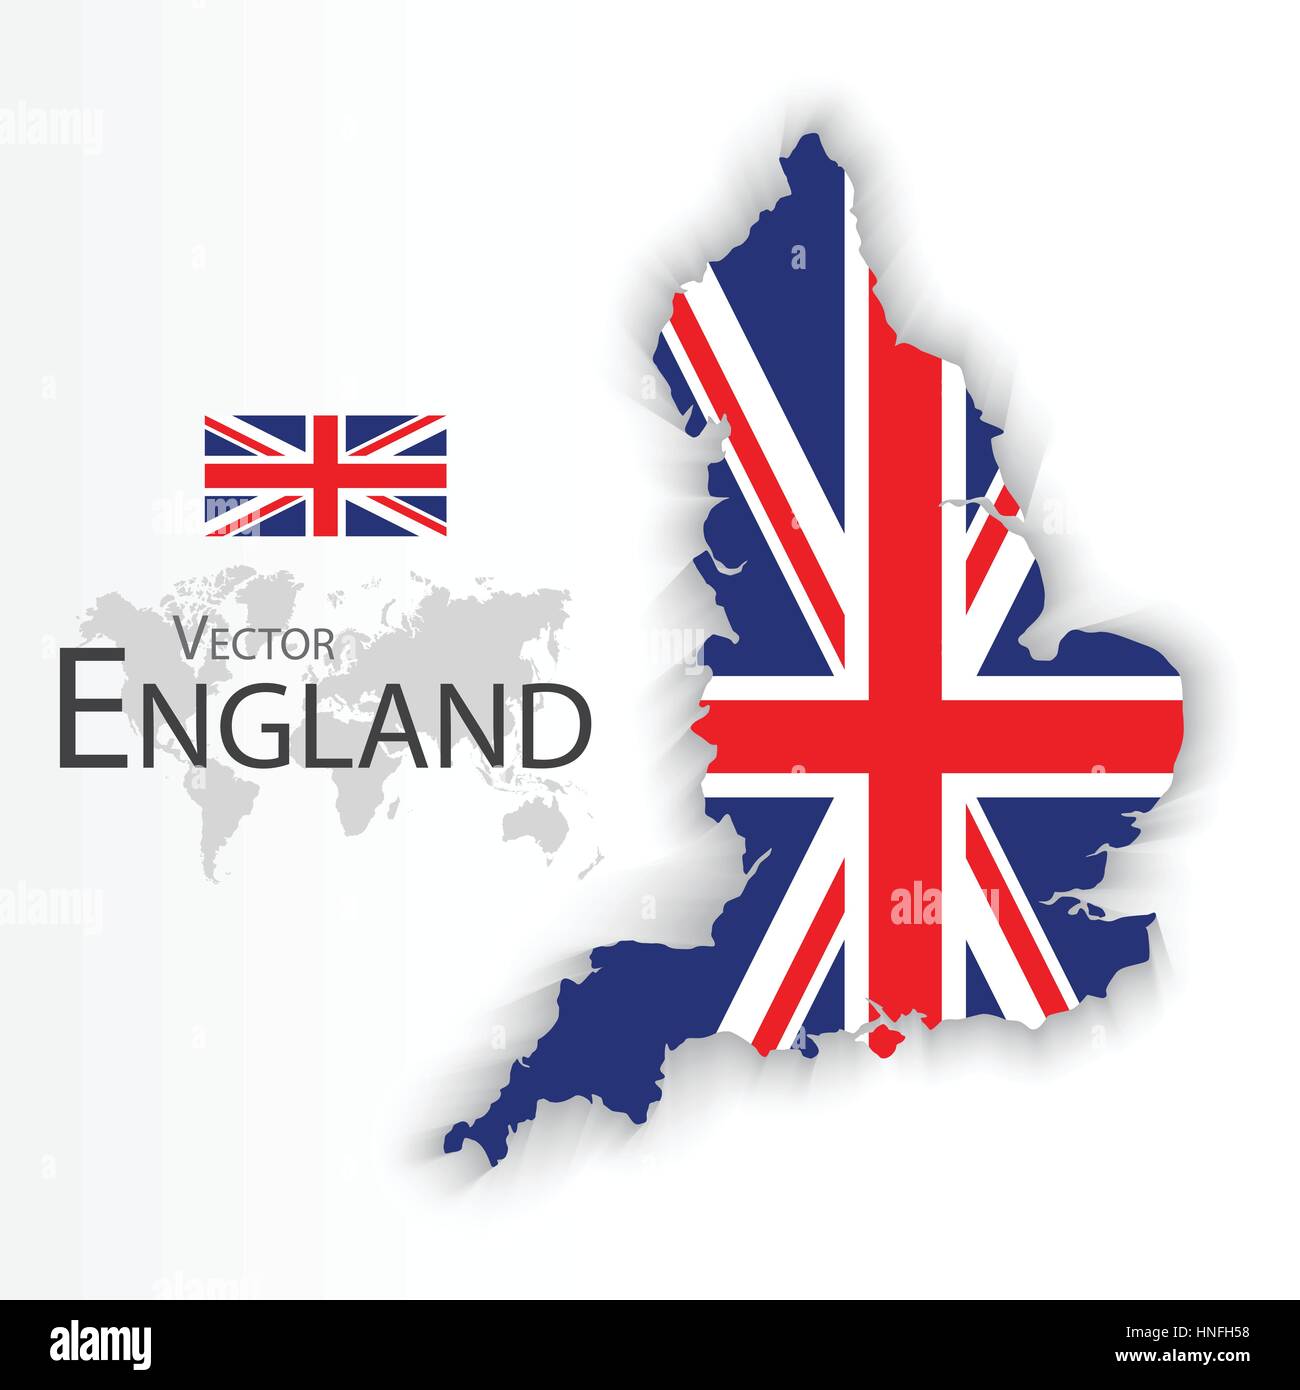 England flag and map ( United Kingdom of Great Britain ) ( combine flag and map ) ( Transportation and tourism concept ) Stock Vector